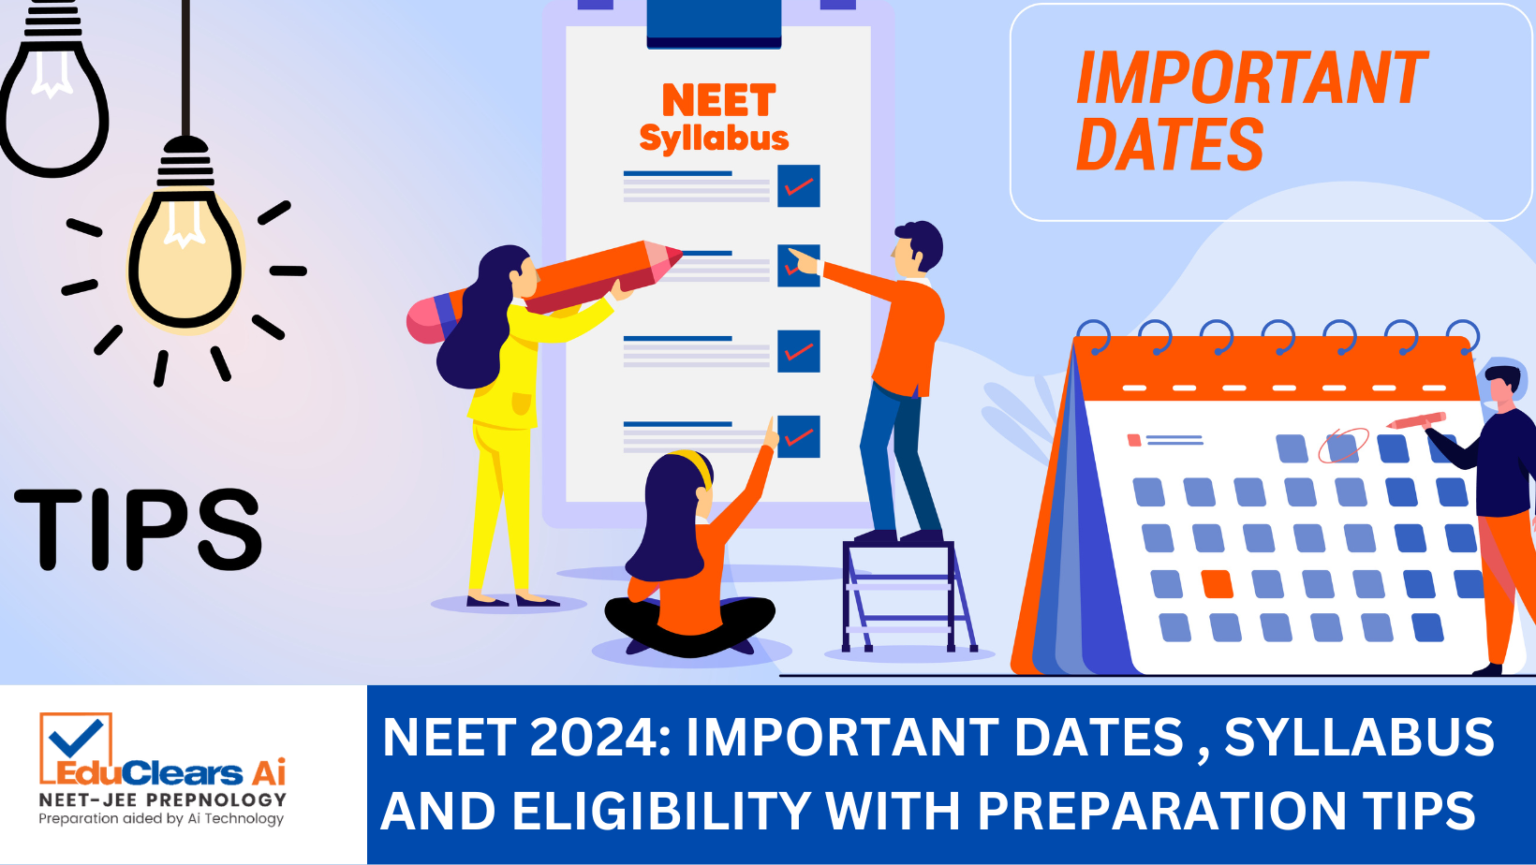 NEET 2024 Eligibility, Syllabus, Important Dates and Preparation Tips